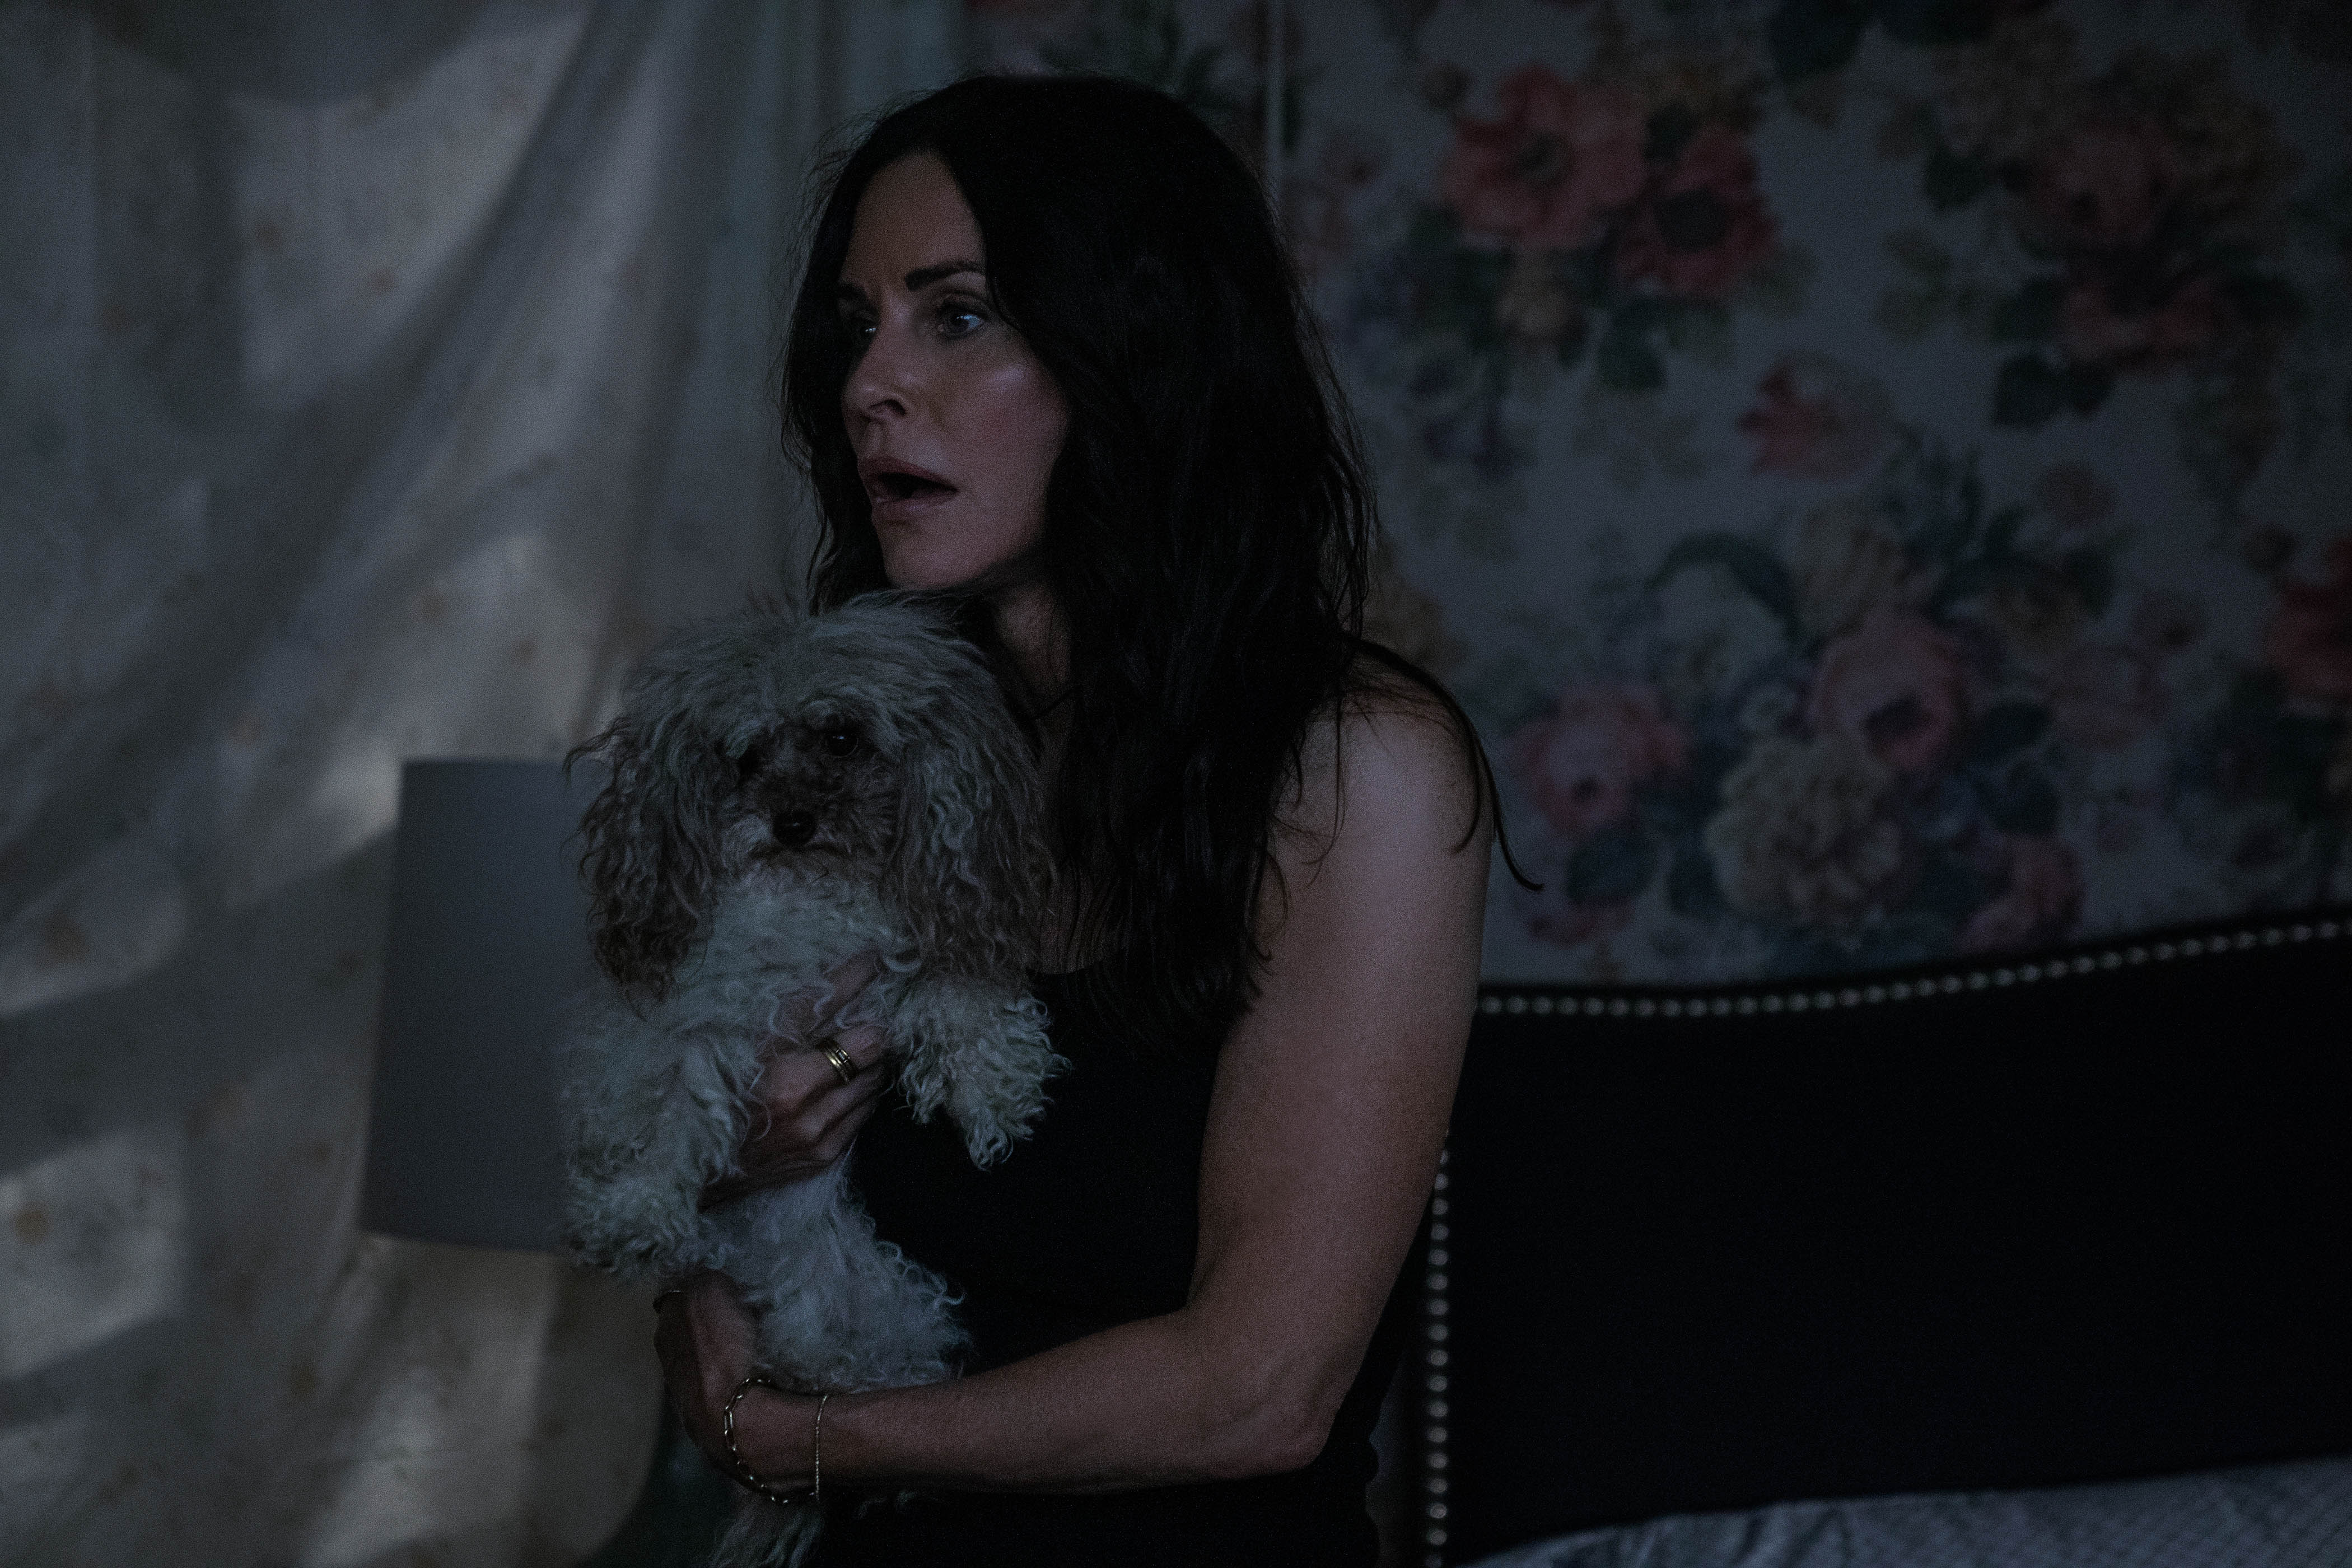 Shining Vale 1x02 Chapter Two - She Comes at Night Courteney Cox as Patricia Phelps